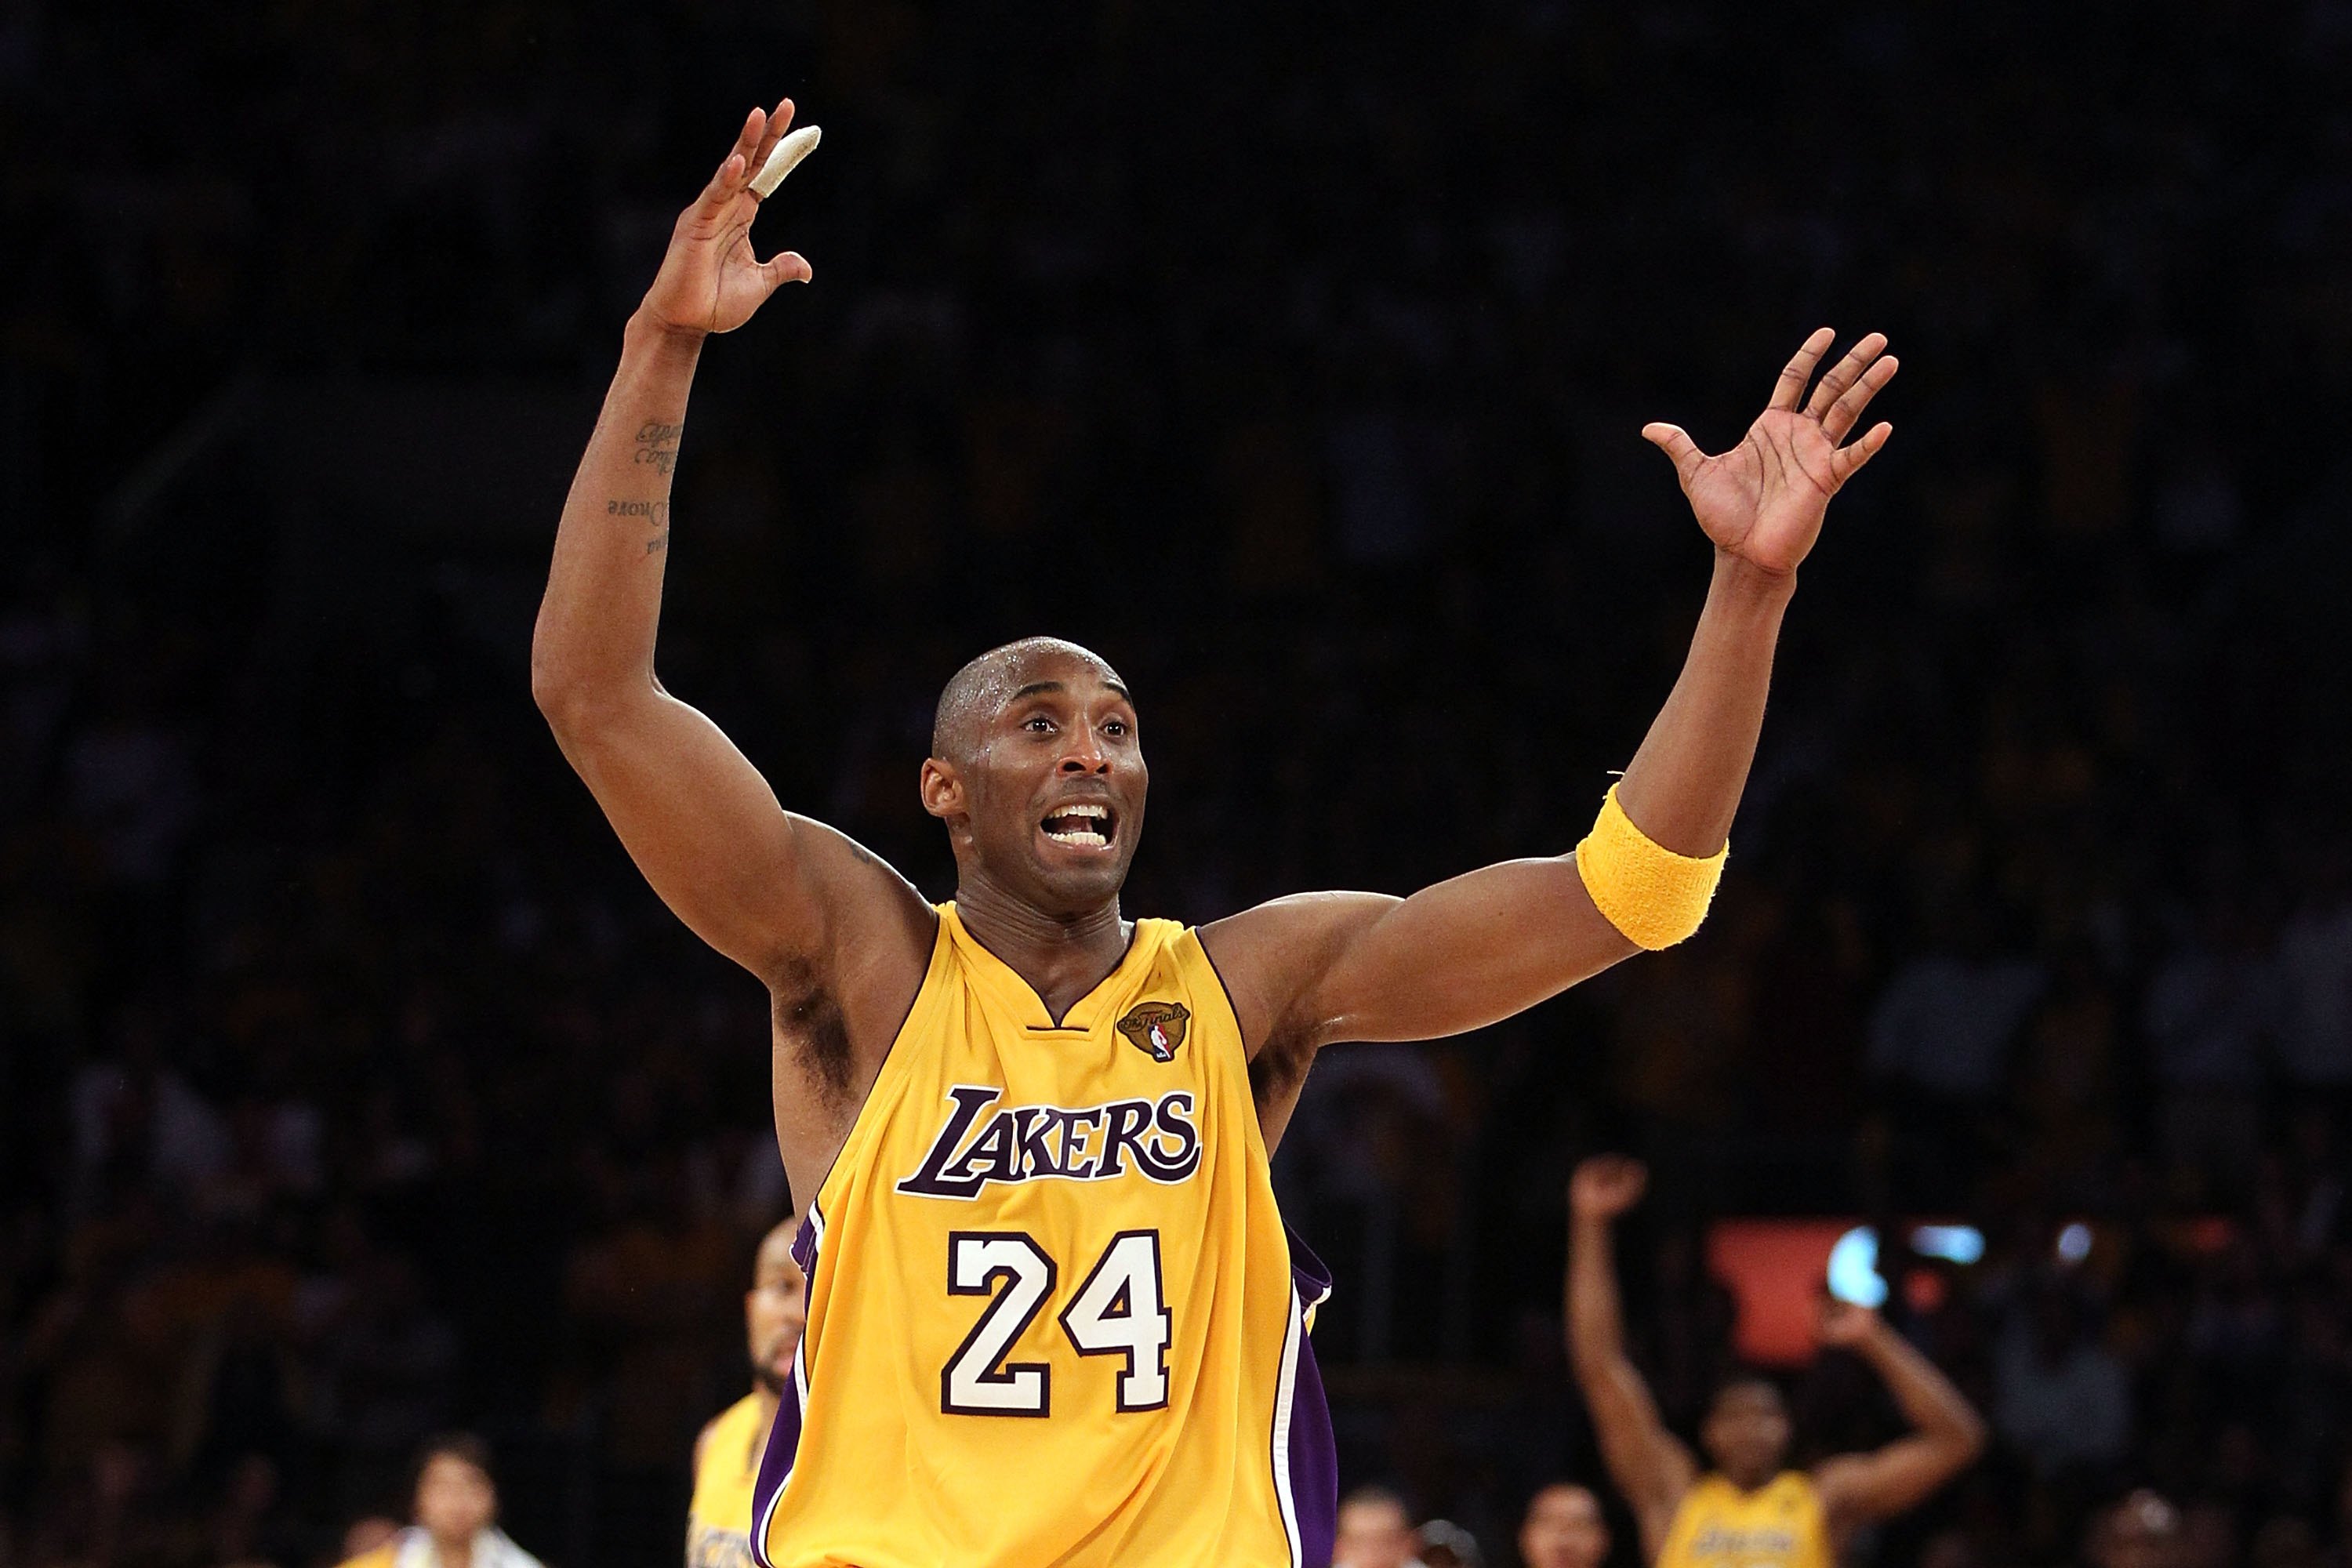 How Kobe Bryant Became One of NBA's All-Time Great Players